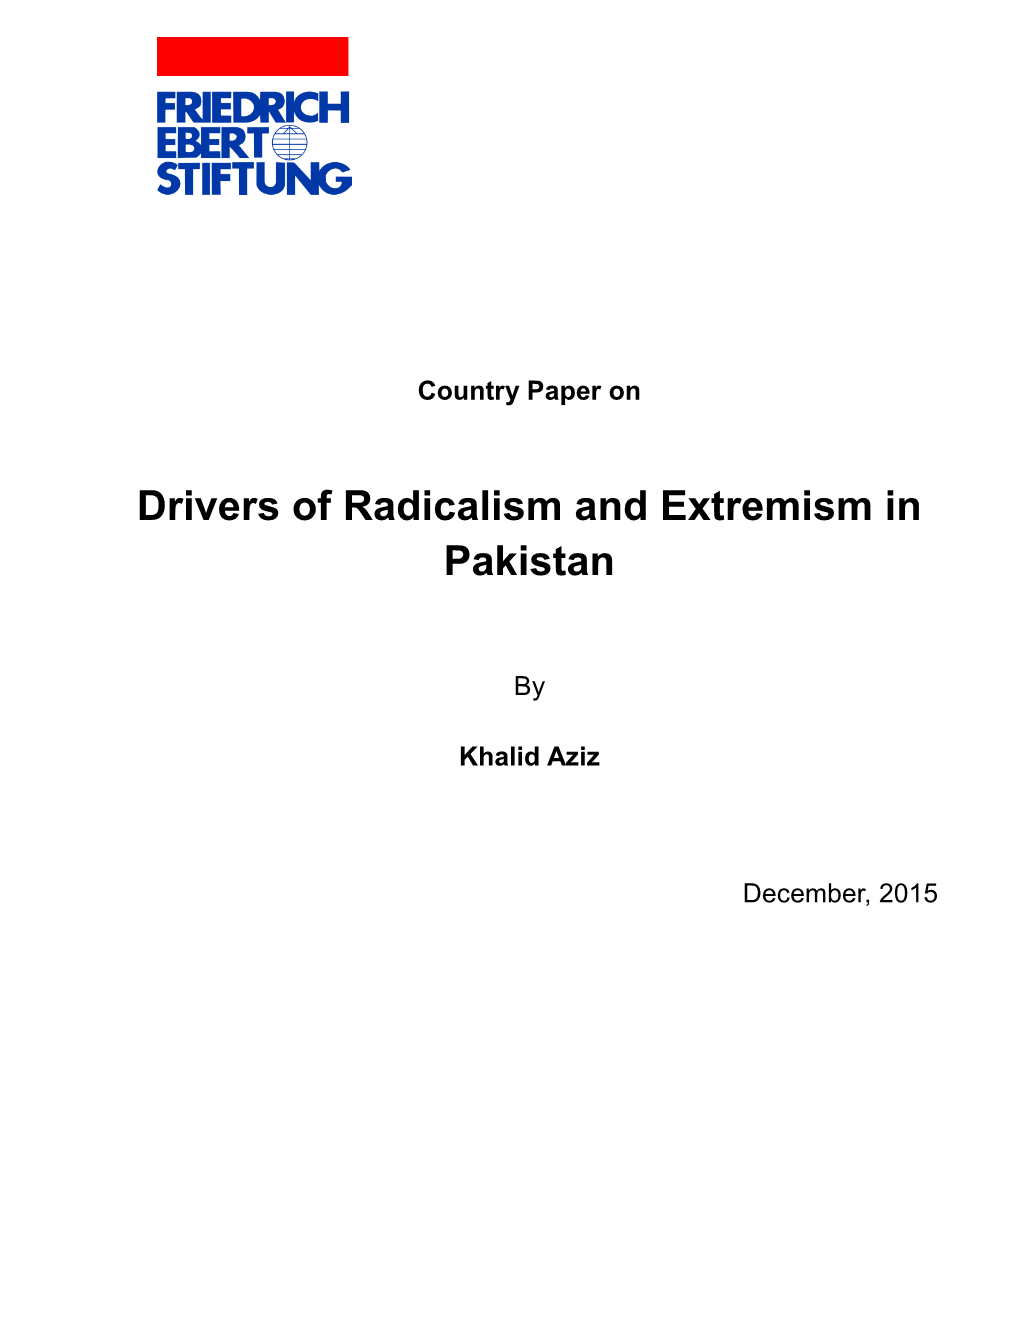 Country Paper on Drivers of Radicalism and Extremism in Pakistan